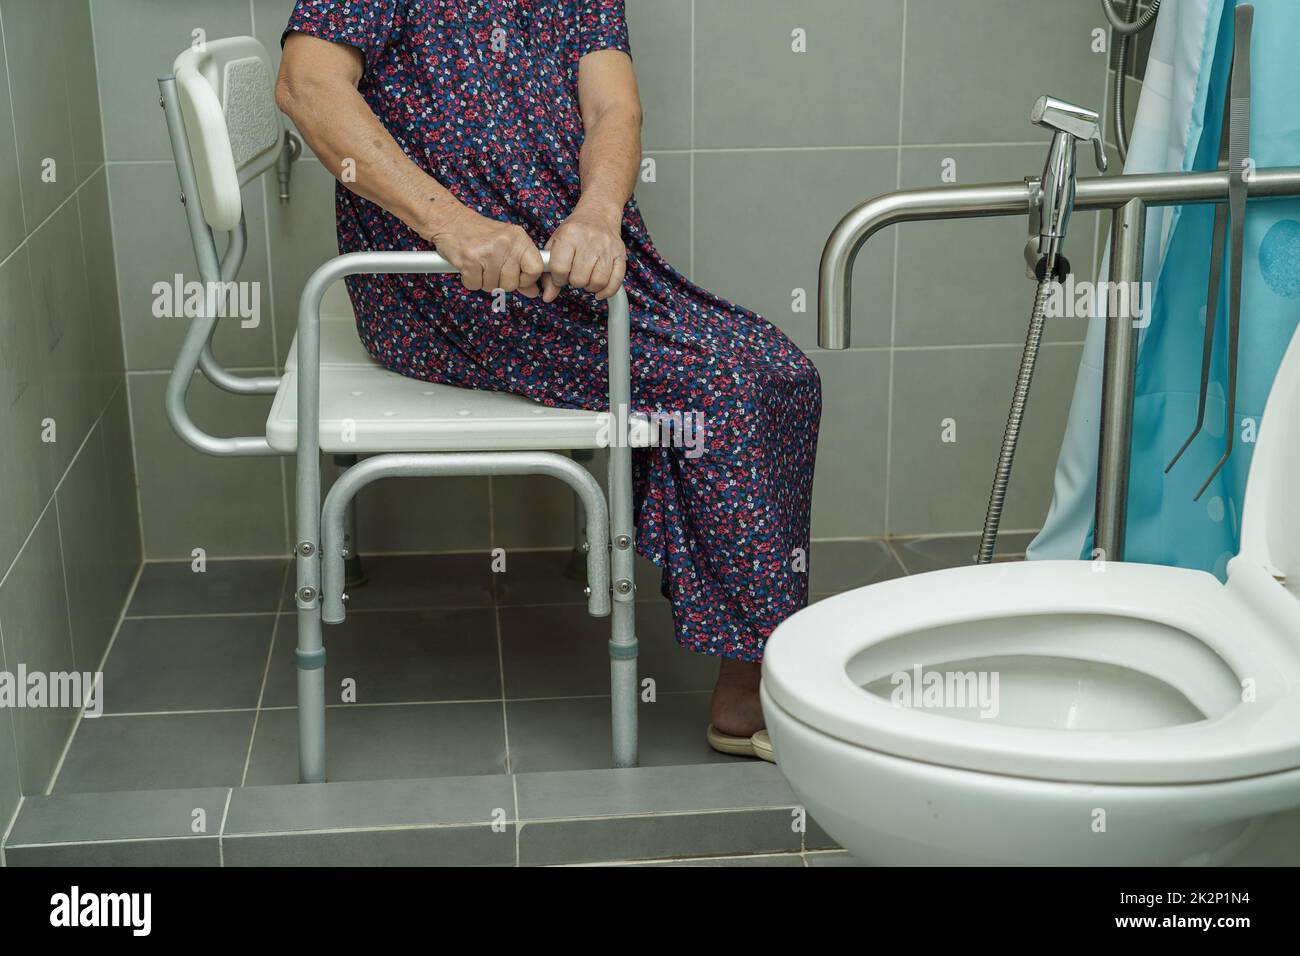 Asian elderly old woman patient use toilet support rail in bathroom, handrail safety grab bar, security in nursing hospital. Stock Photo